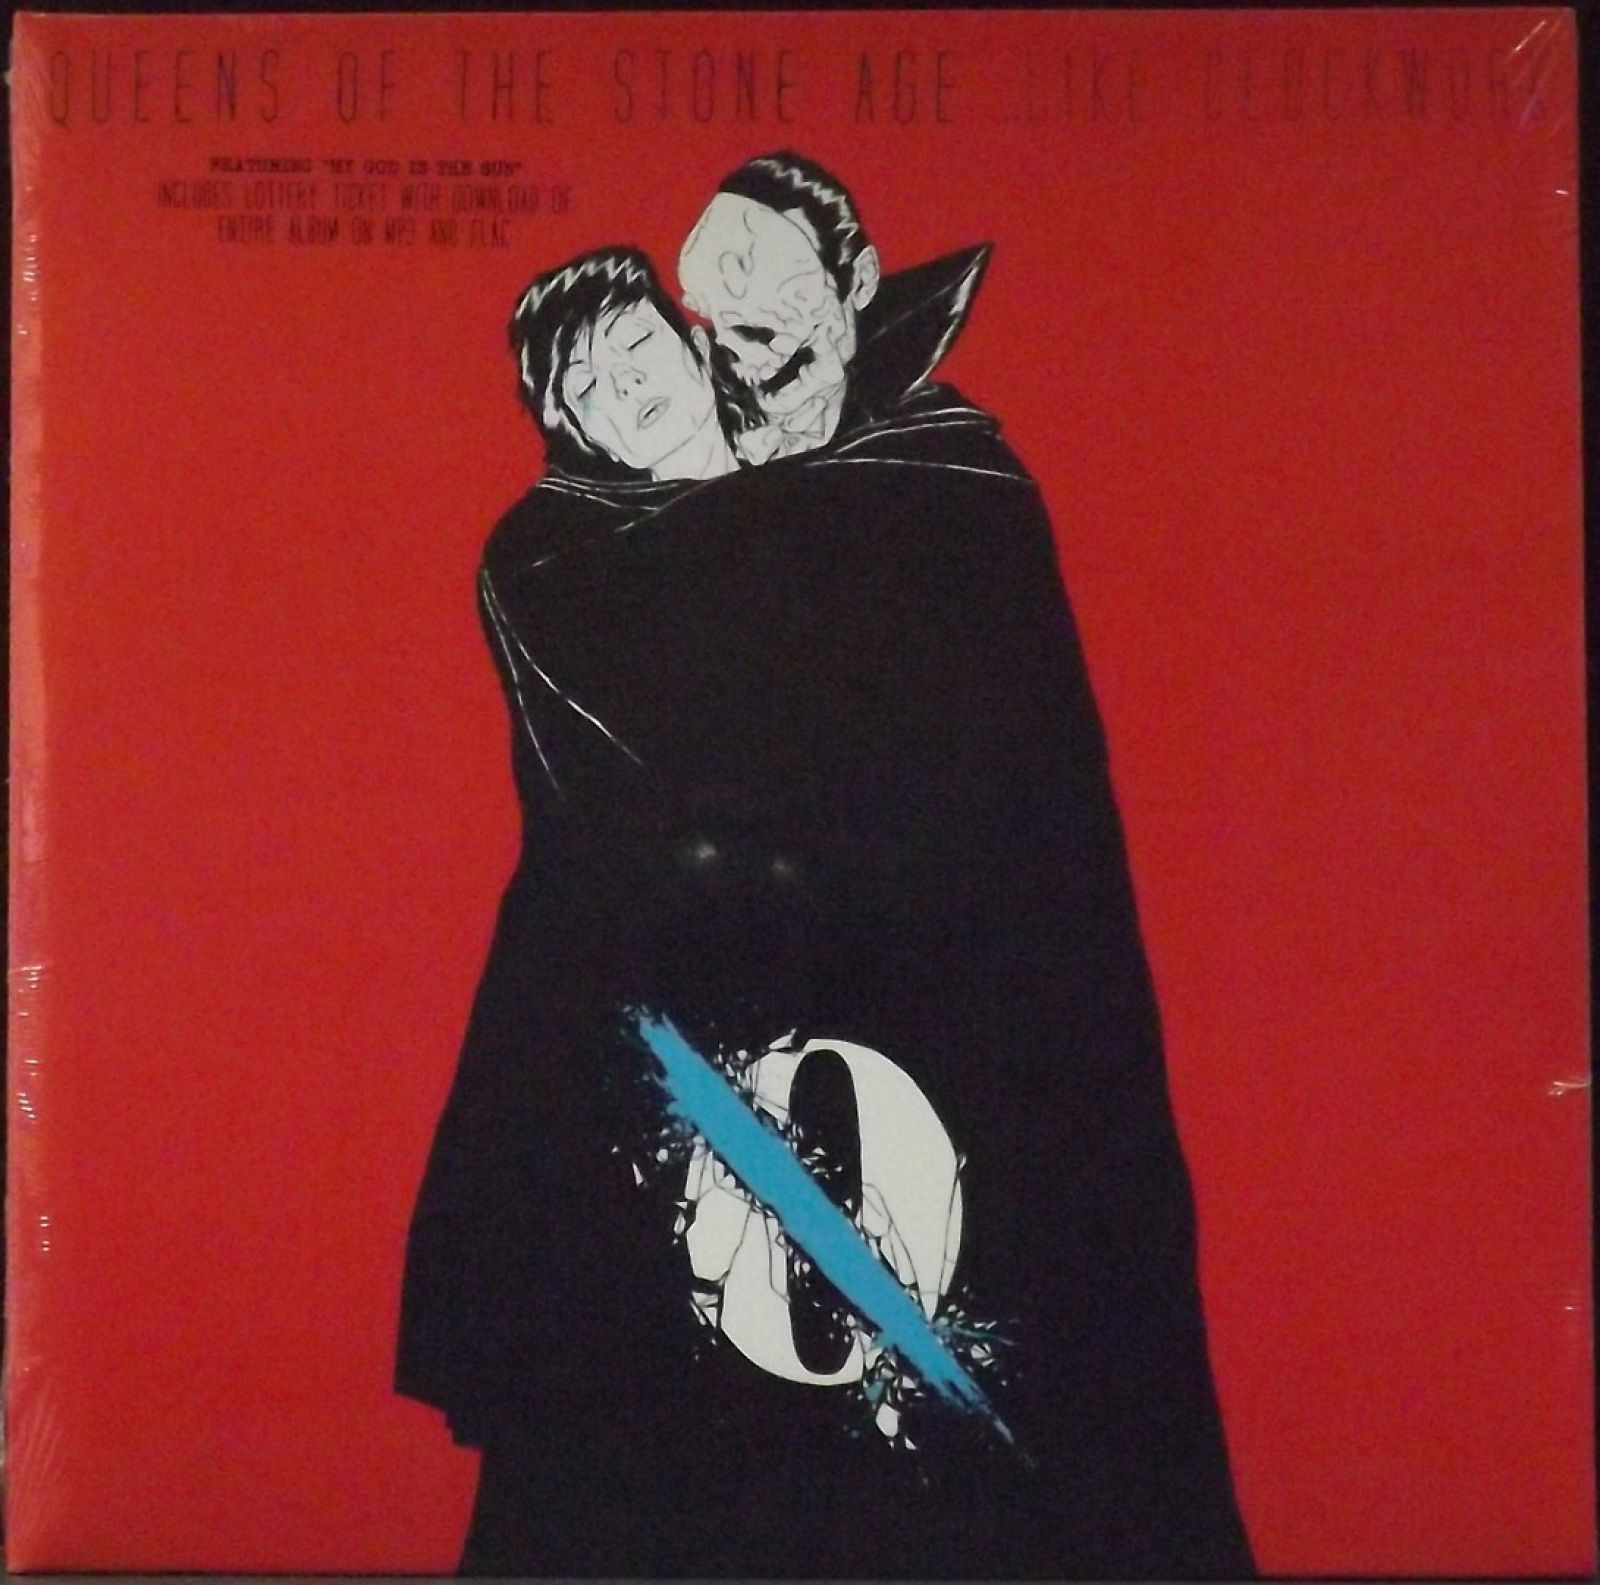 Виниловая пластинка Queens Of The Stone Age, Like Clockwork (0744861104018) queens of the stone age queens of the stone age queens of the stone age limited colour